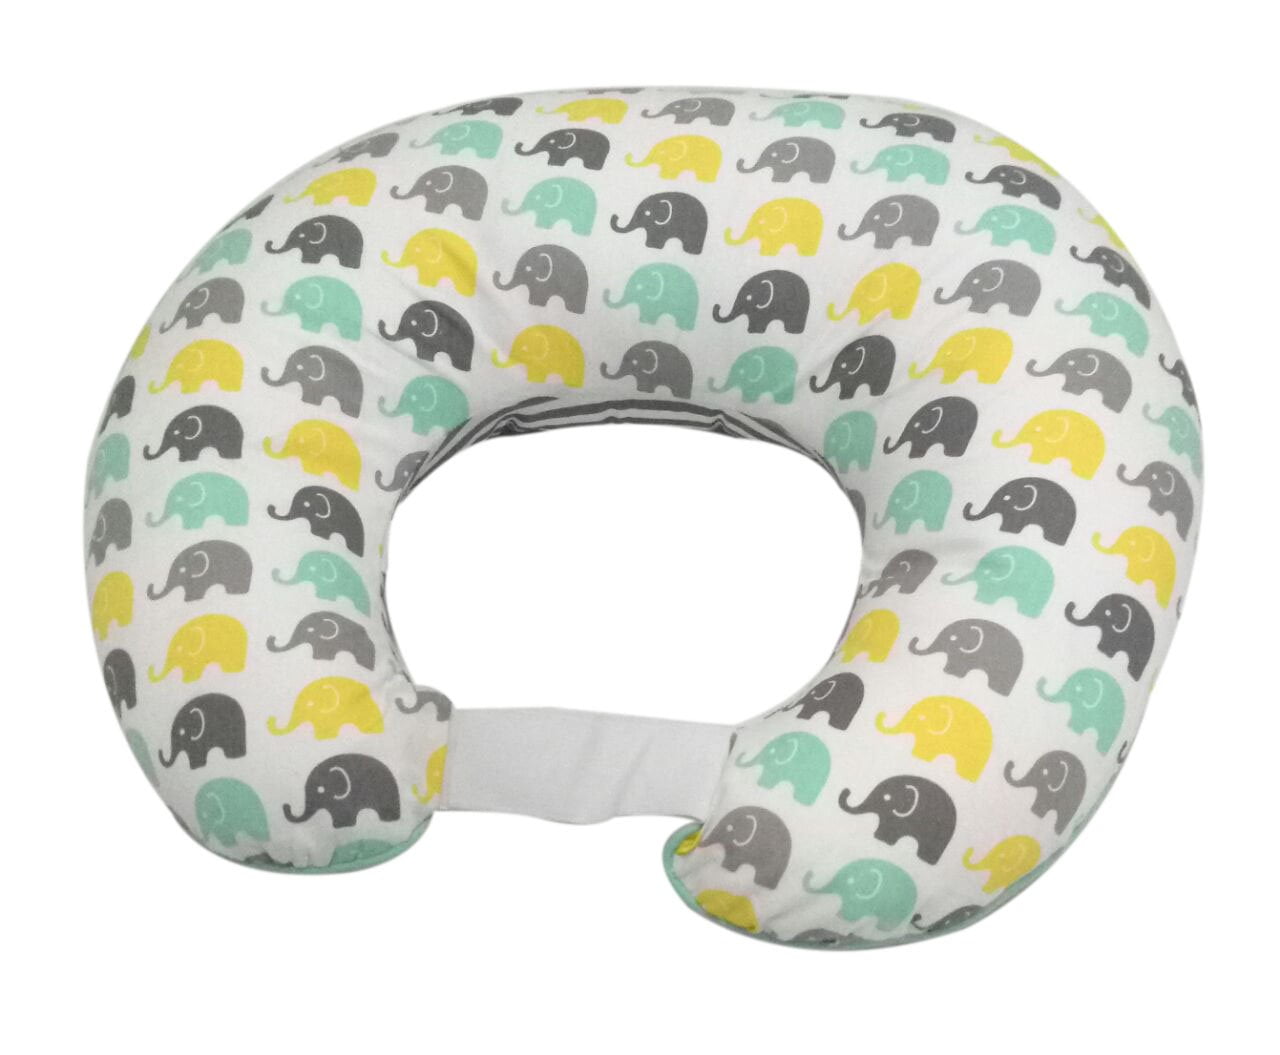 Blue Elephant Cover for The Peanut Shell Extra-Large Nursing Pillow